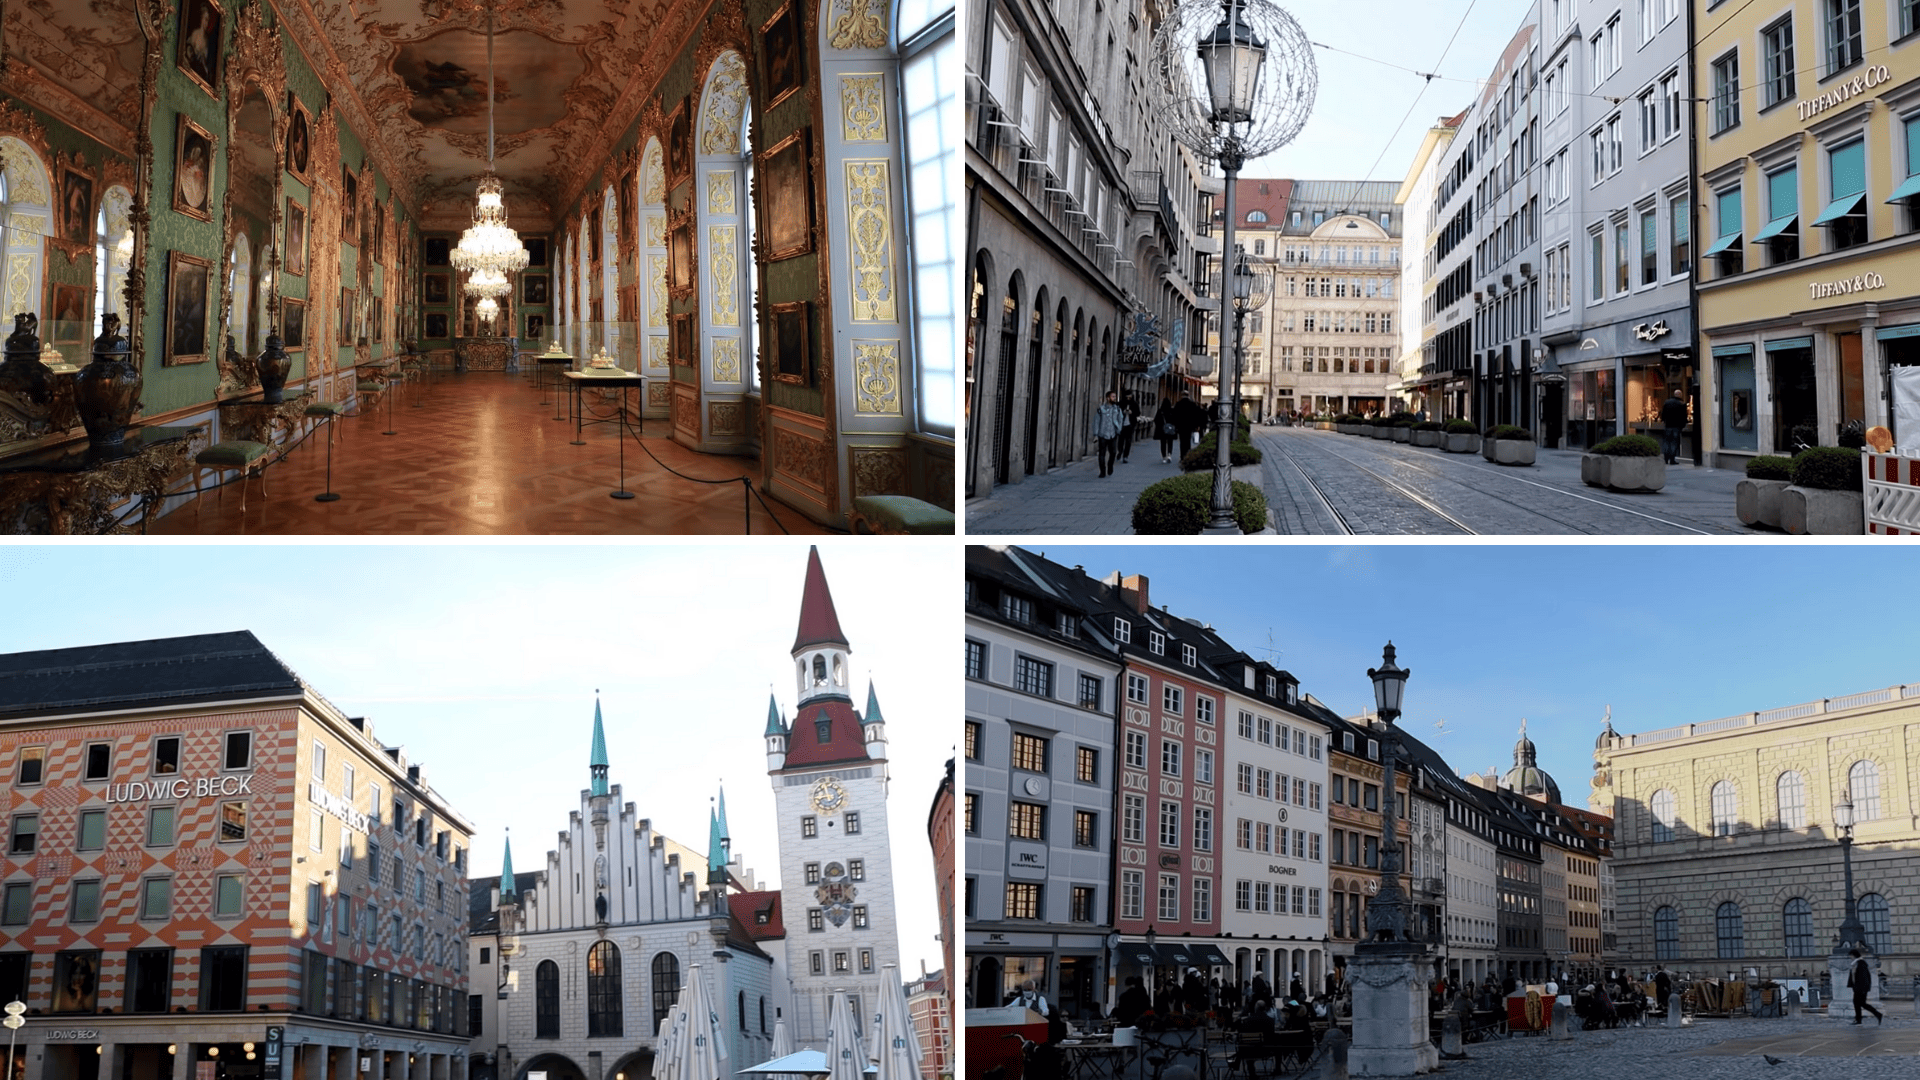 Munich's Old Town - A Historical Walking Tour | My Merry Messy Life